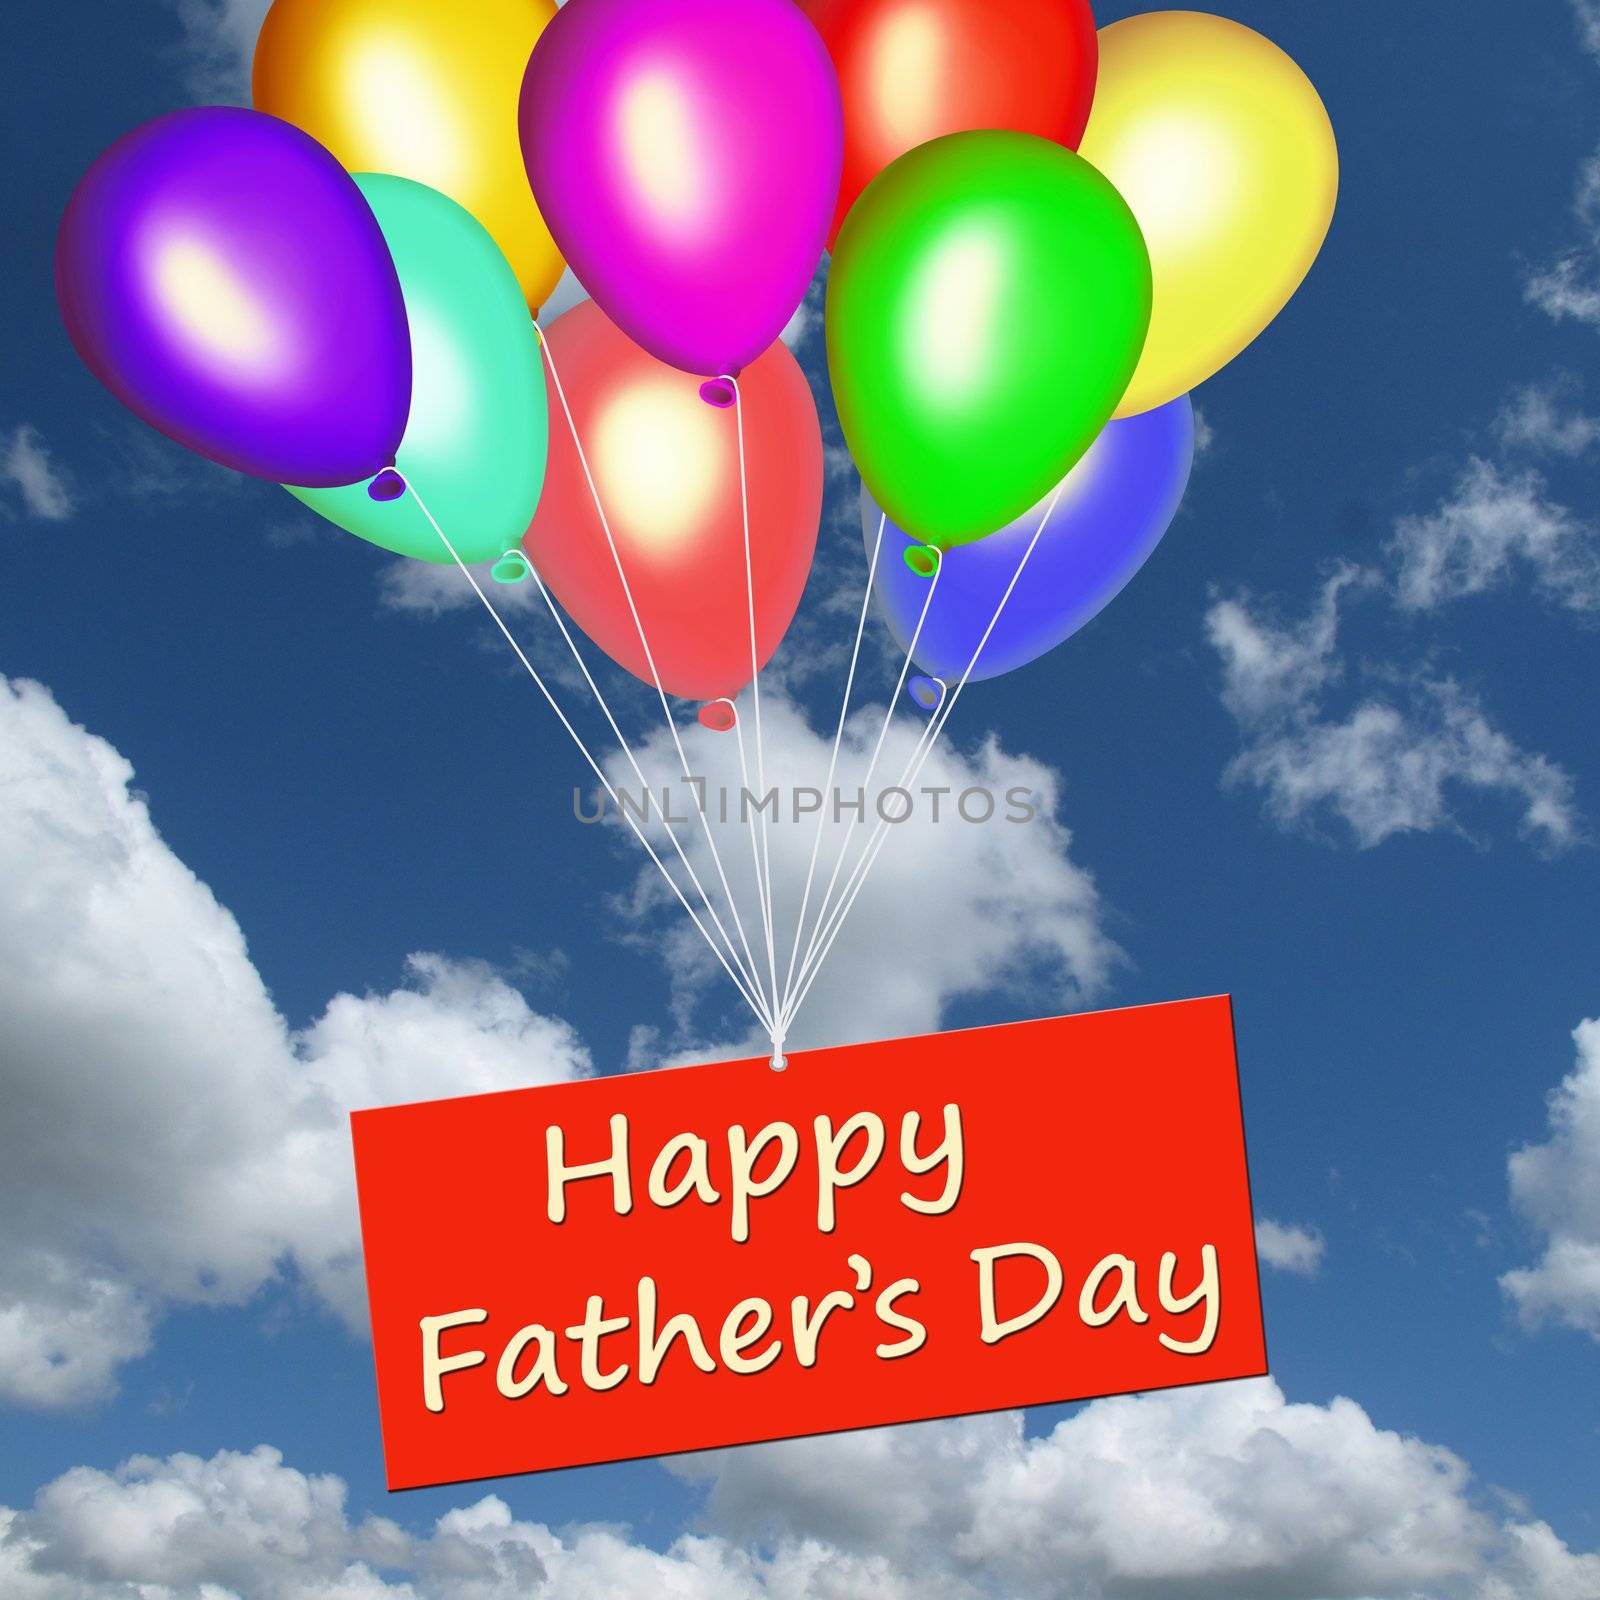 Happy Father's day with colorful baloons on a blue sky background